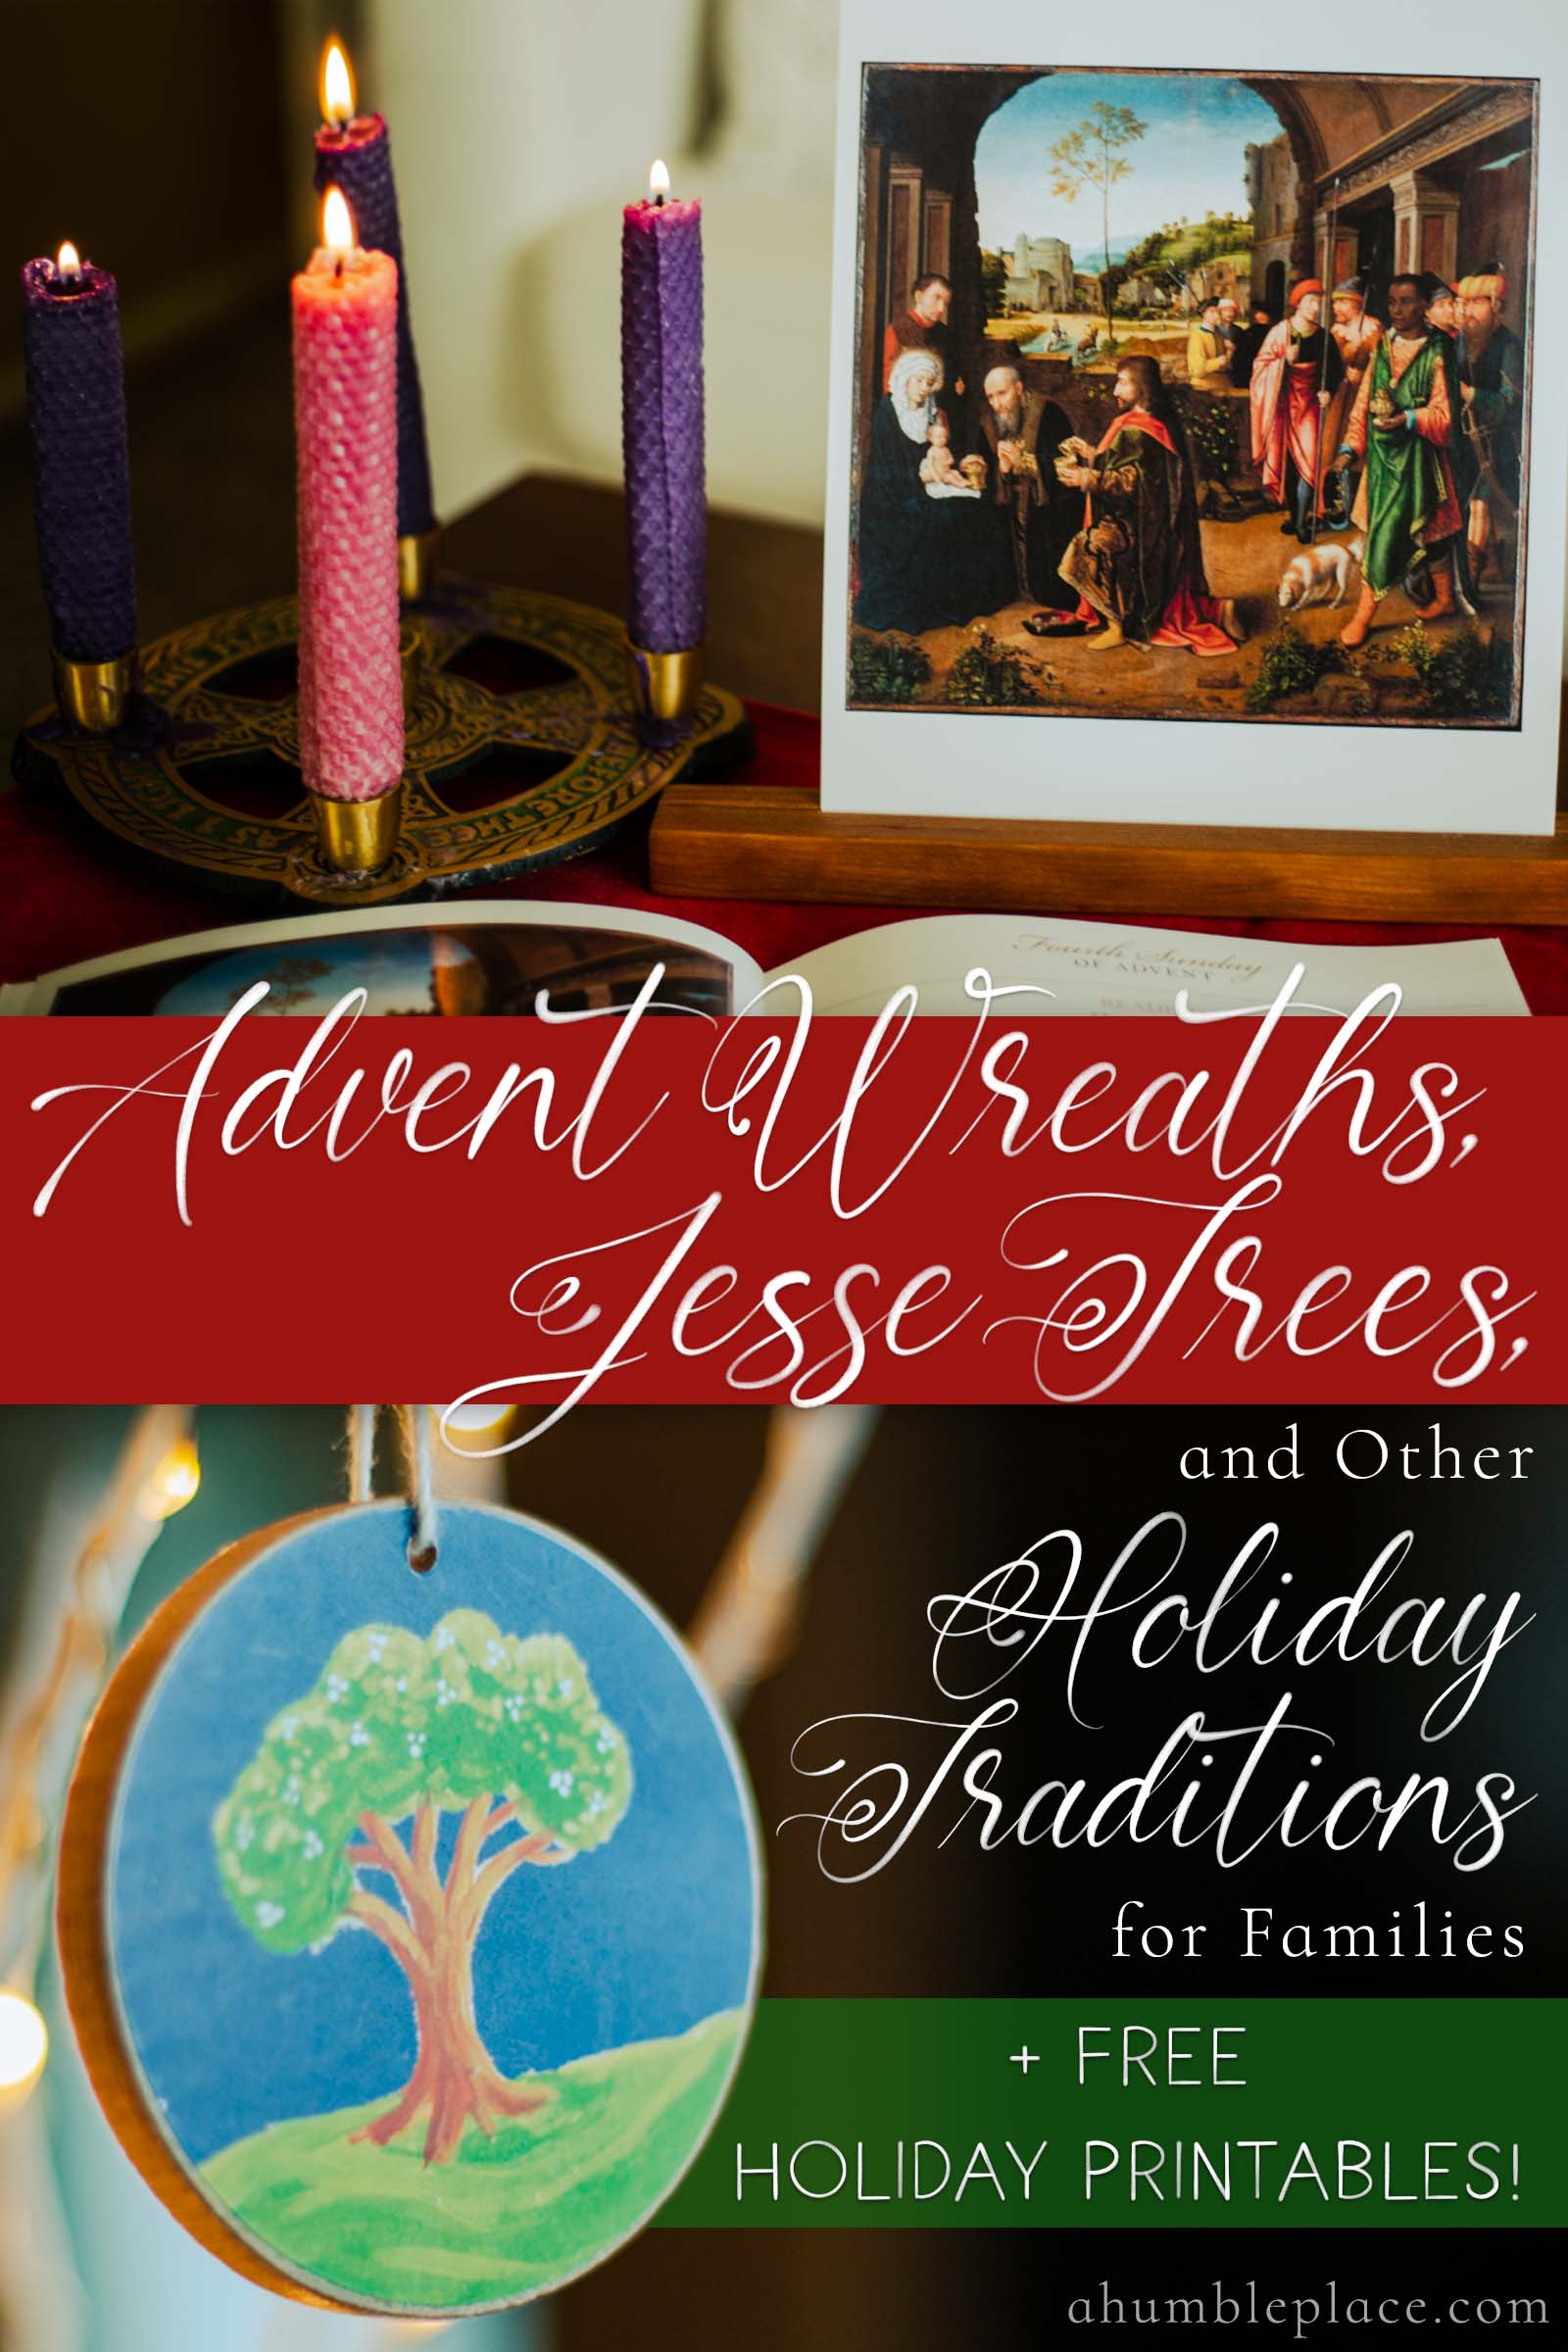 The Jesse Tree, Advent Wreath, and Other Holiday Traditions for Families (+ free holiday printables!) - ahumbleplace.com